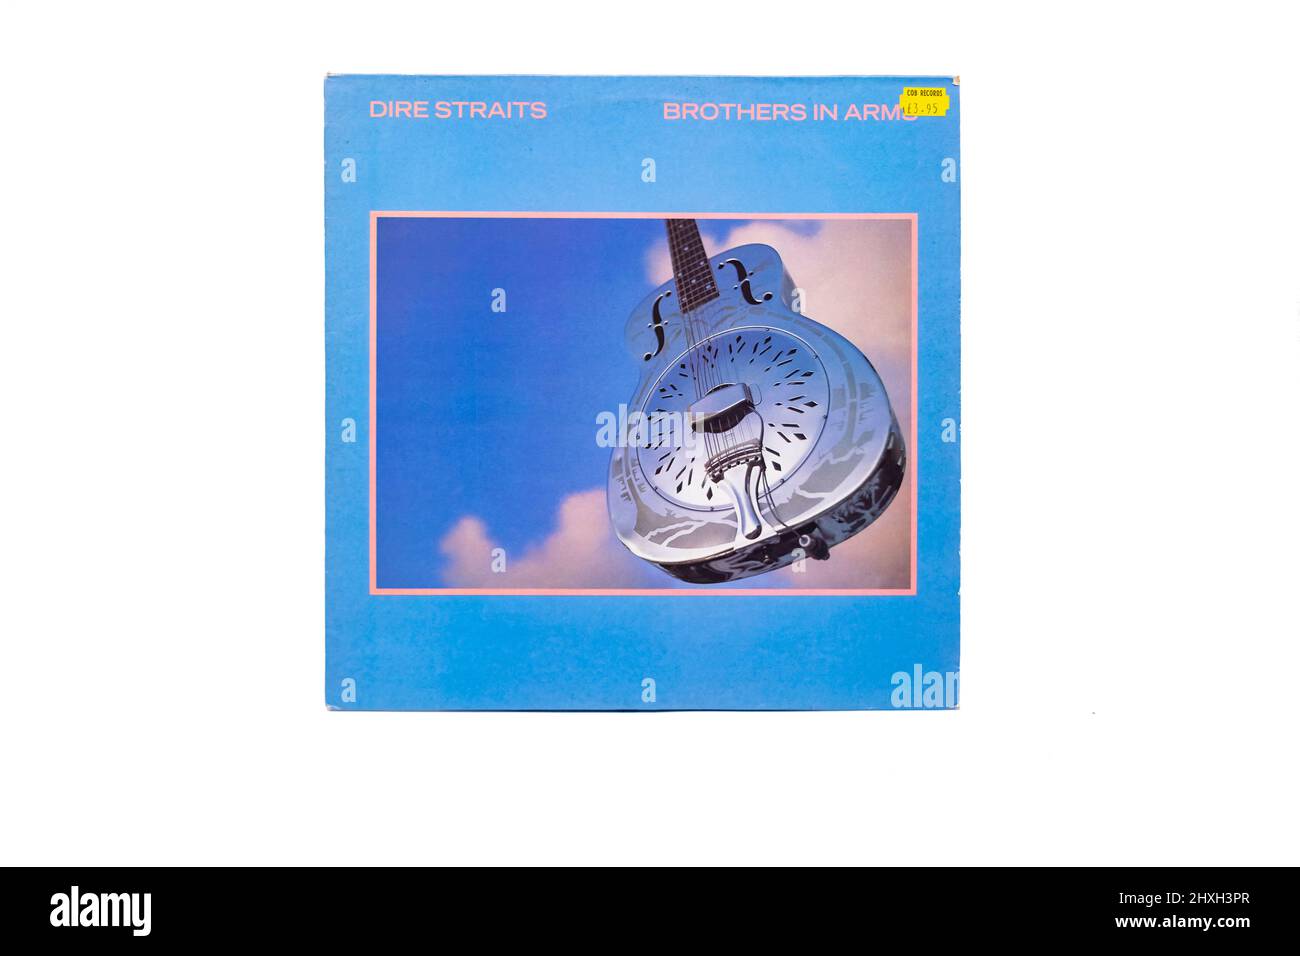 Brothers in Arms by Dire straits vinyl LP record cover Stock Photo - Alamy